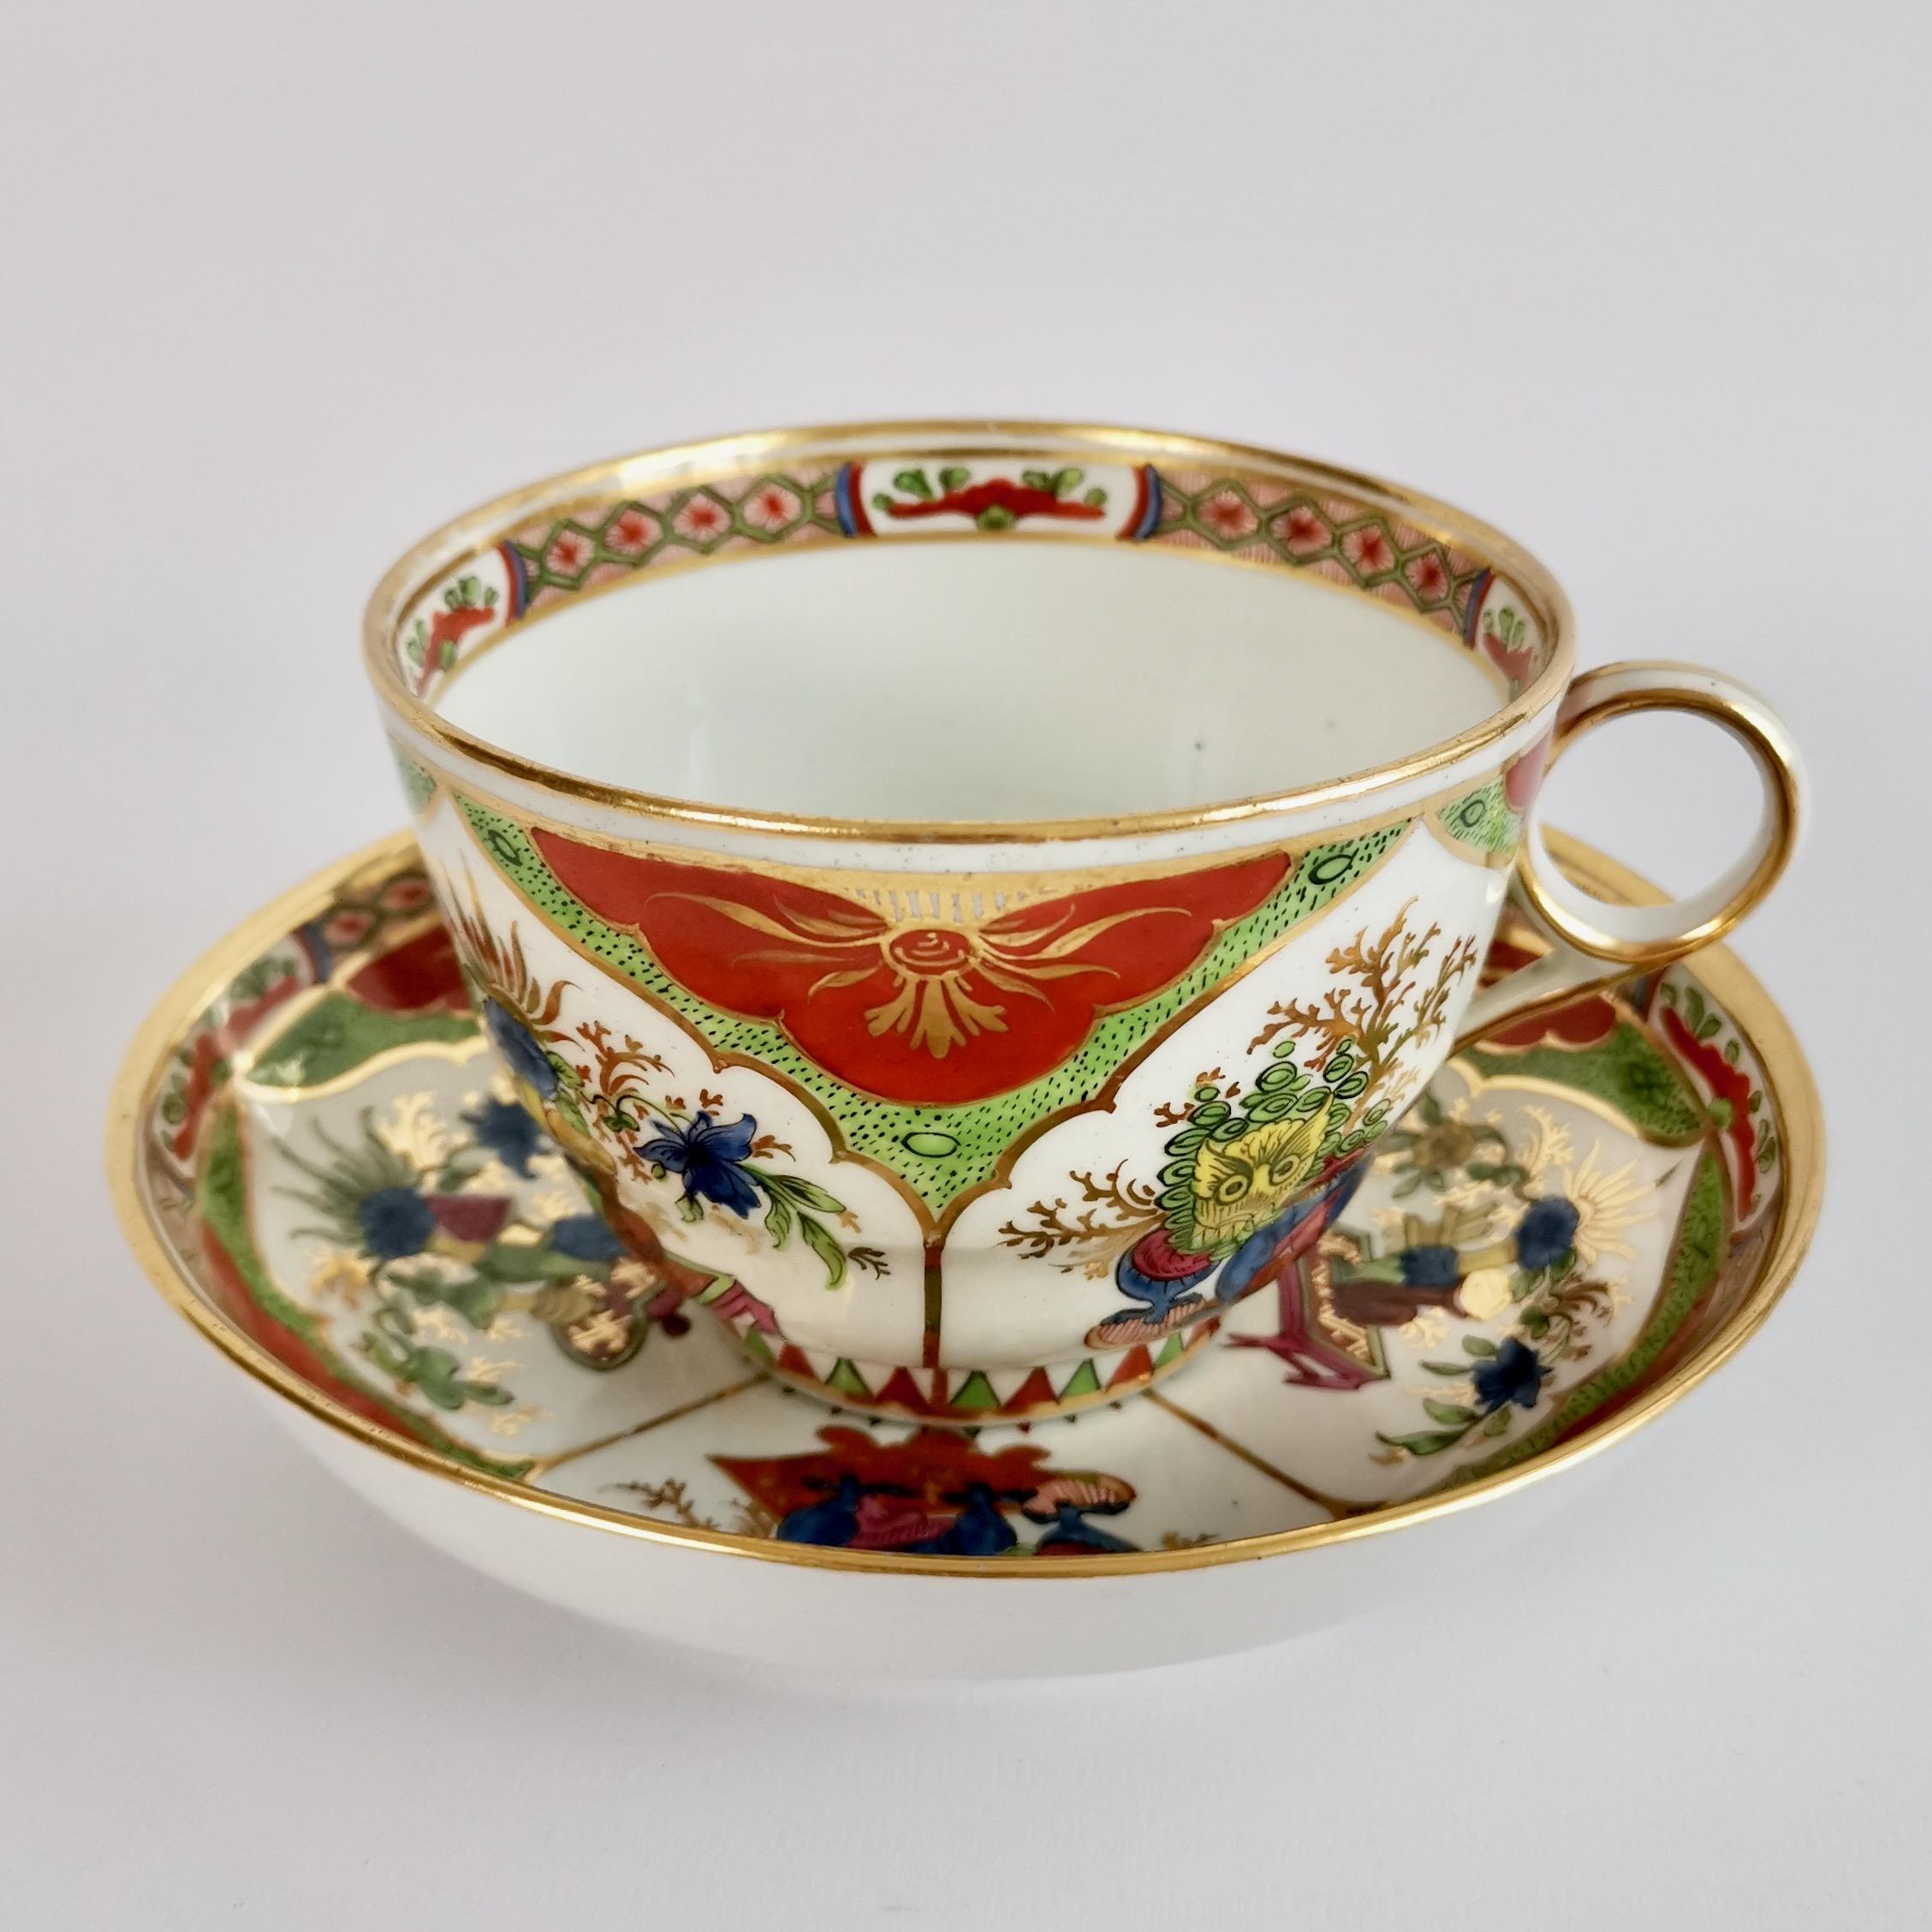 George III Chamberlains Worcester Porcelain Breakfast Cup, Dragons in Compartments, Ca 1800